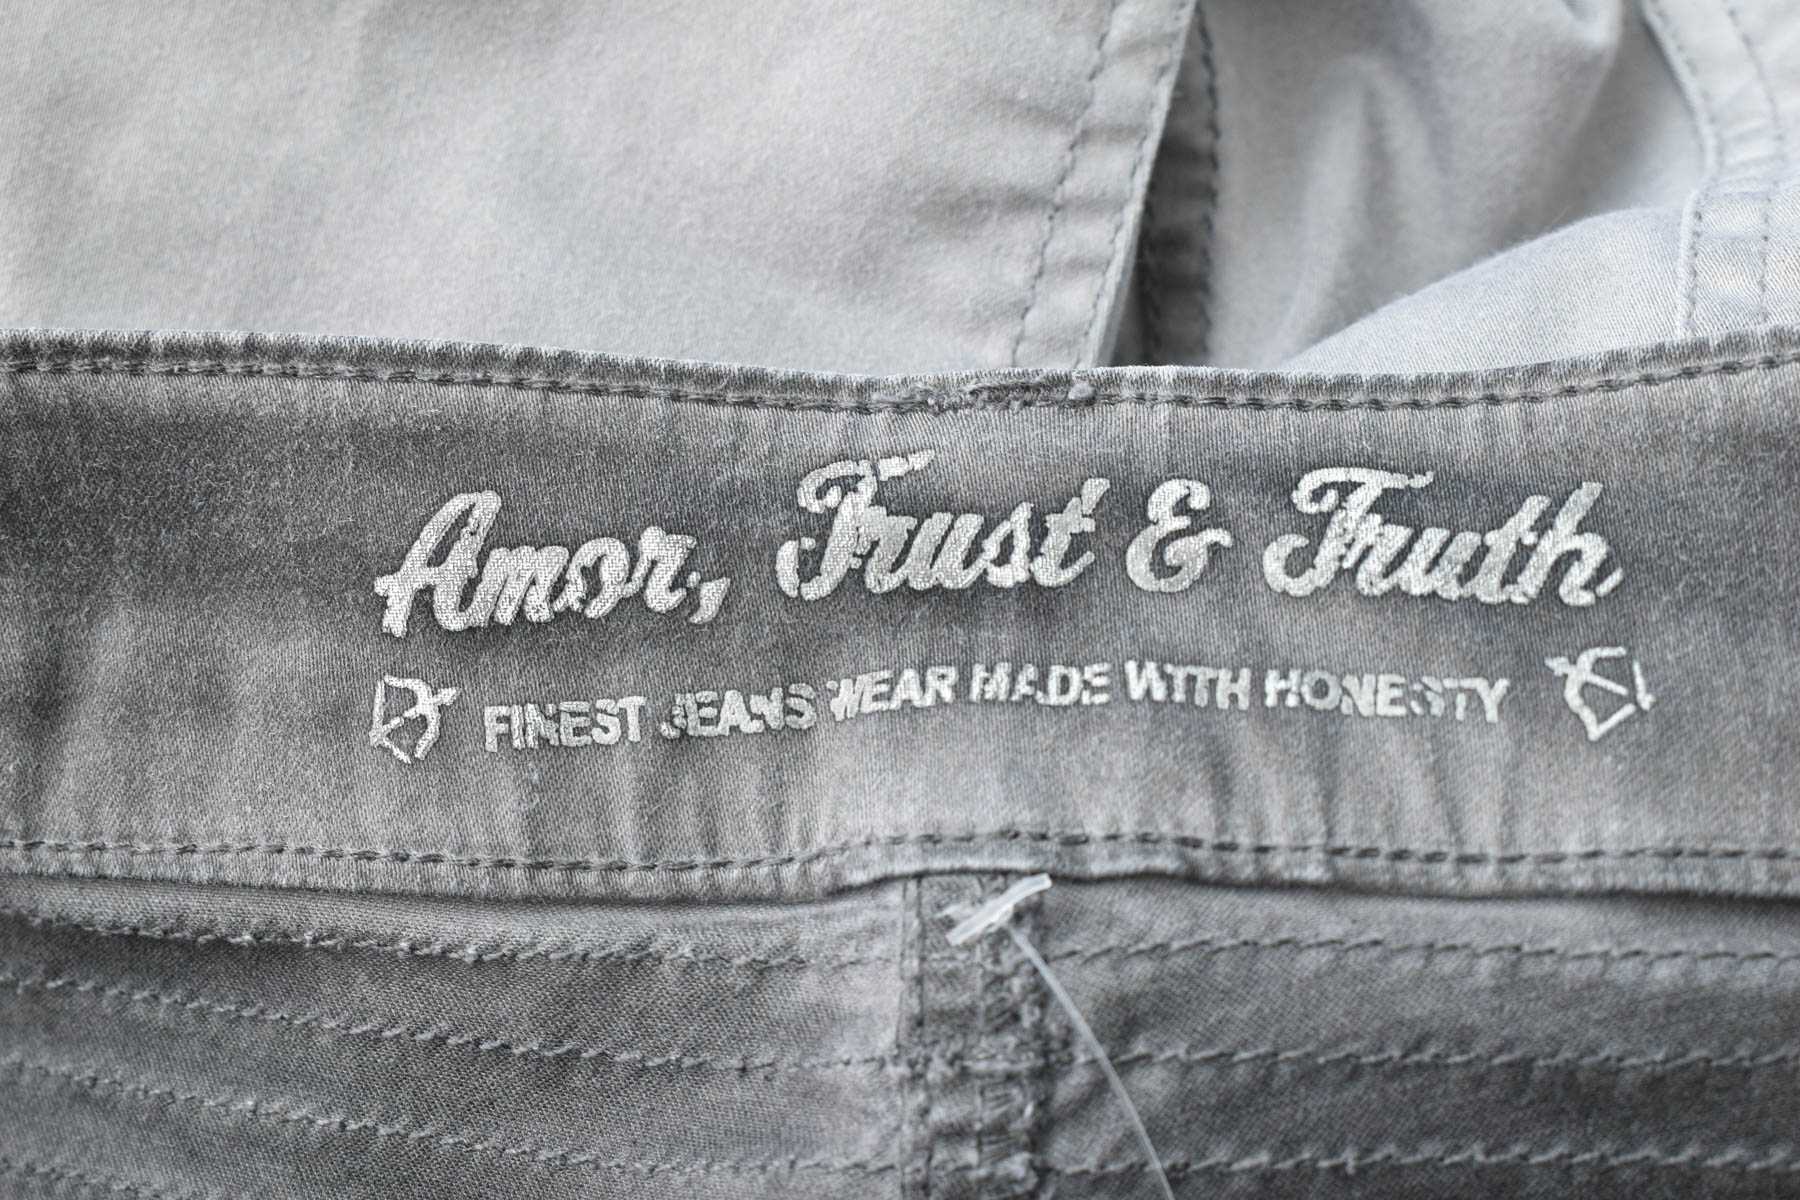 Women's jeans - Amor, Trust and Truth - 2